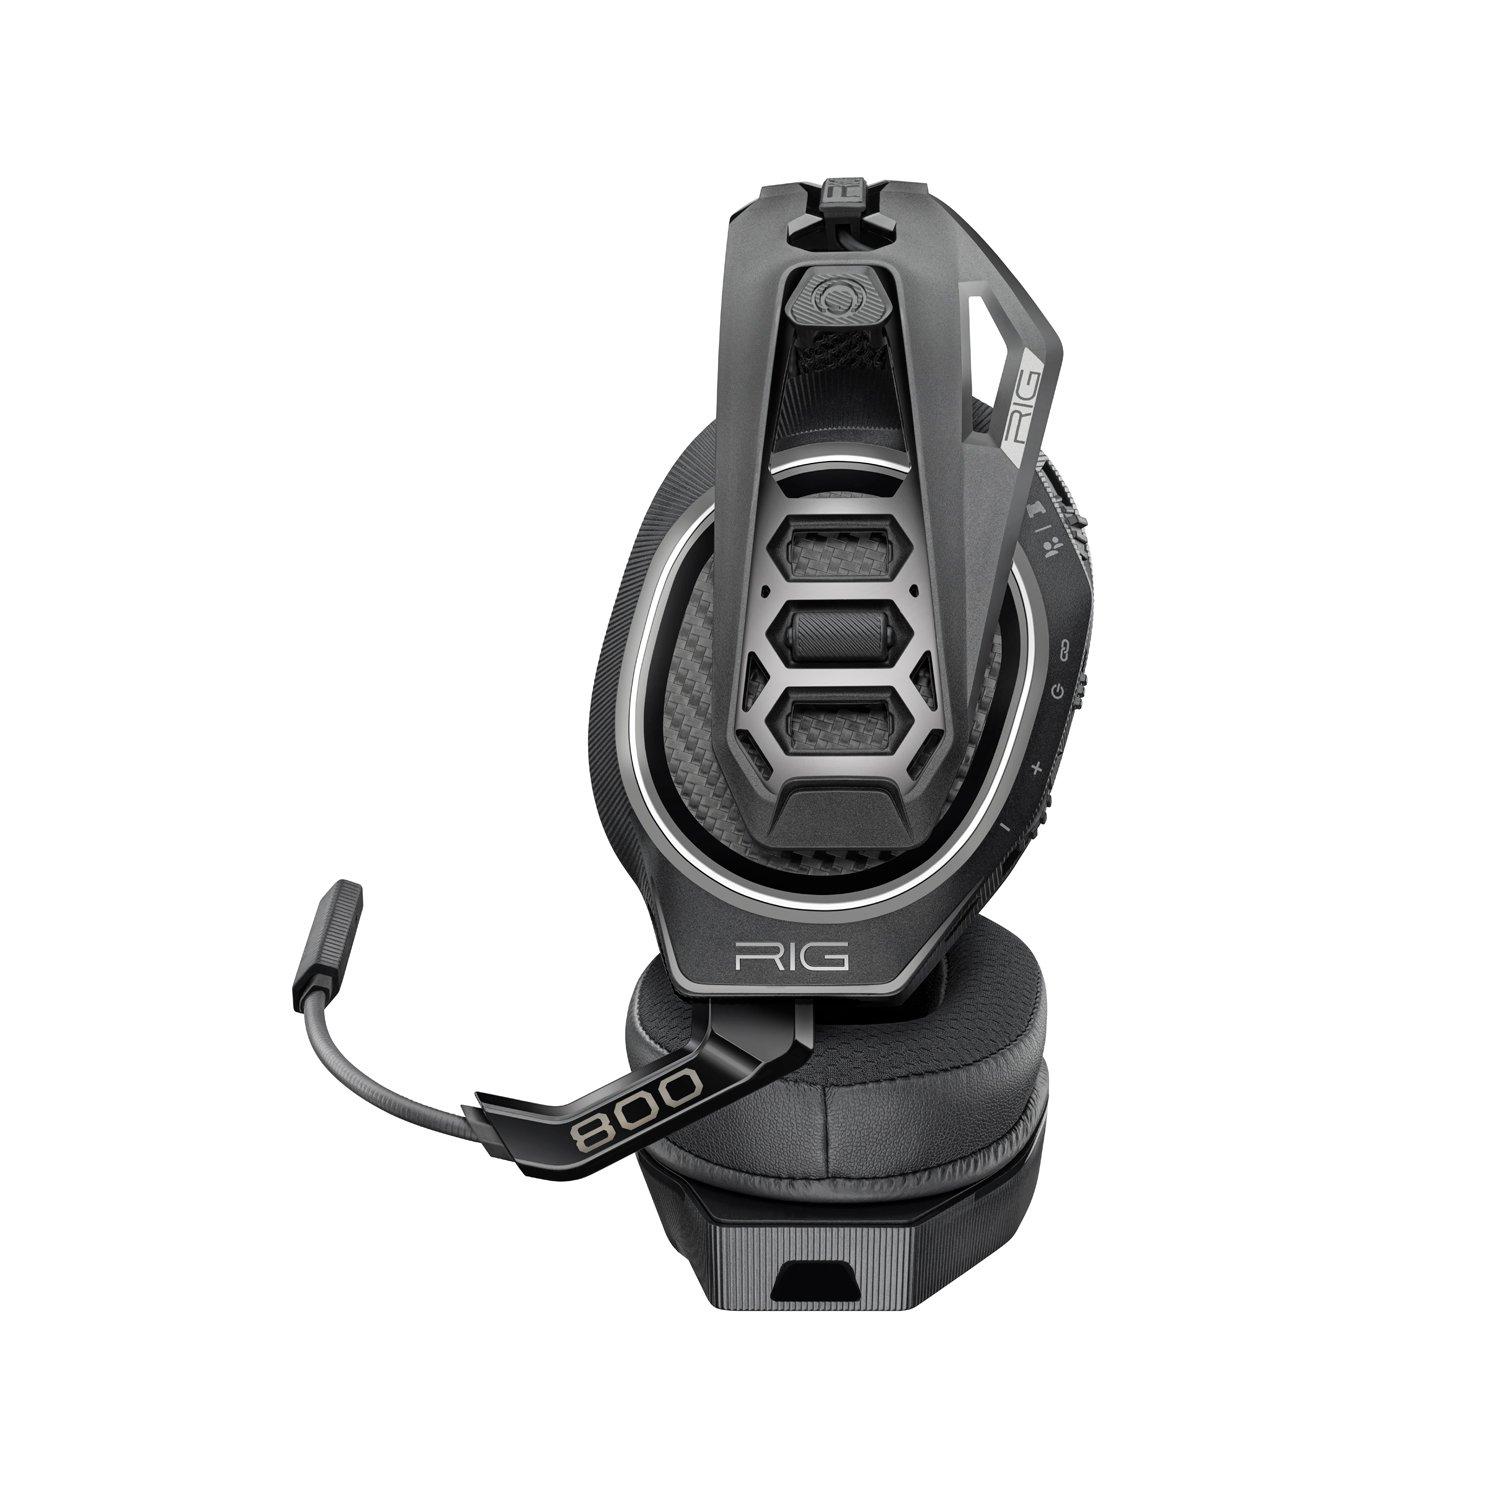 list item 3 of 7 RIG 800 PRO HX Wireless Headset for Xbox and Windows 10 with Charging Base